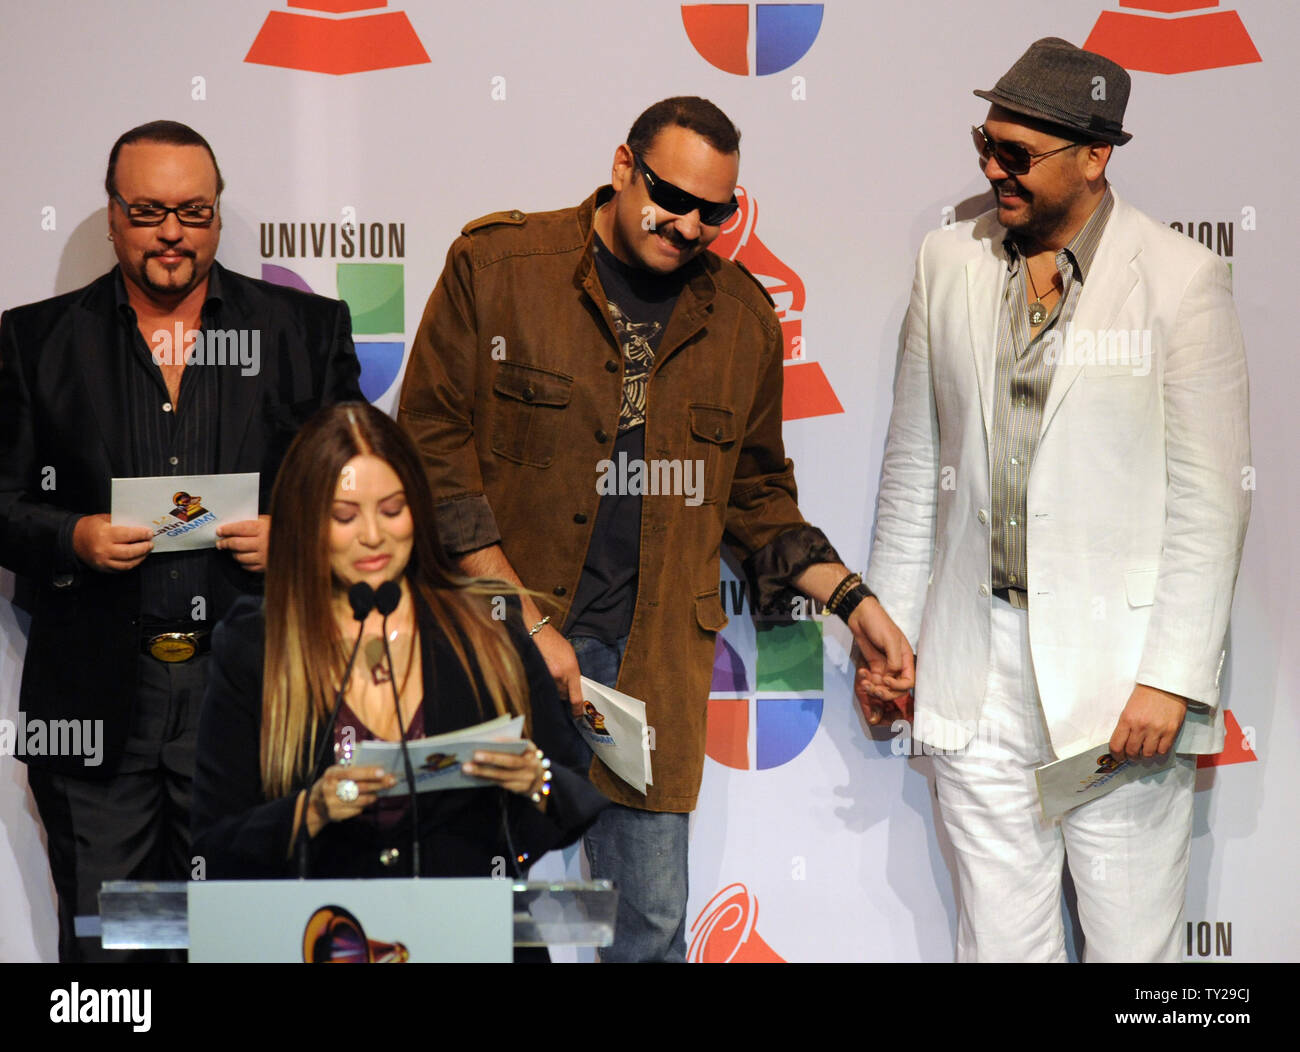 Musicians Pepe Agullar (C) and Reyli share a light moment as singer and songwriter Myriam Hernandez announces nominations for the 12th annual Latin Grammy Awards, during a news conference at the Avalon Theatre in the Hollywood section of Los Angeles on September 14, 2011. The winners will be announced in Las Vegas on November 10.  UPI/Jim Ruymen Stock Photo